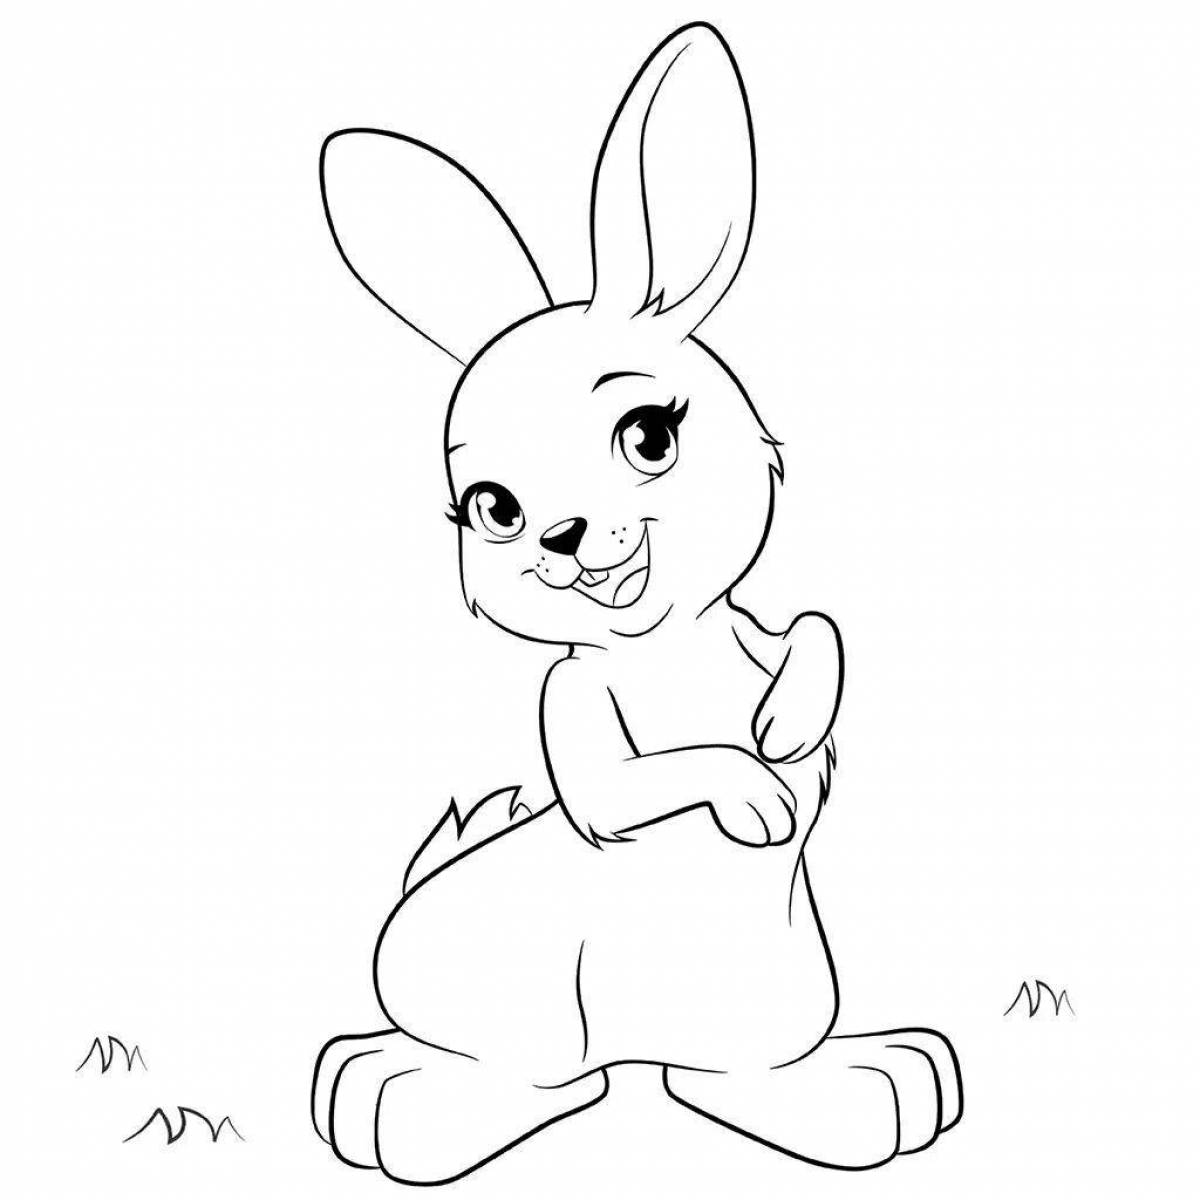 Fancy hare coloring page